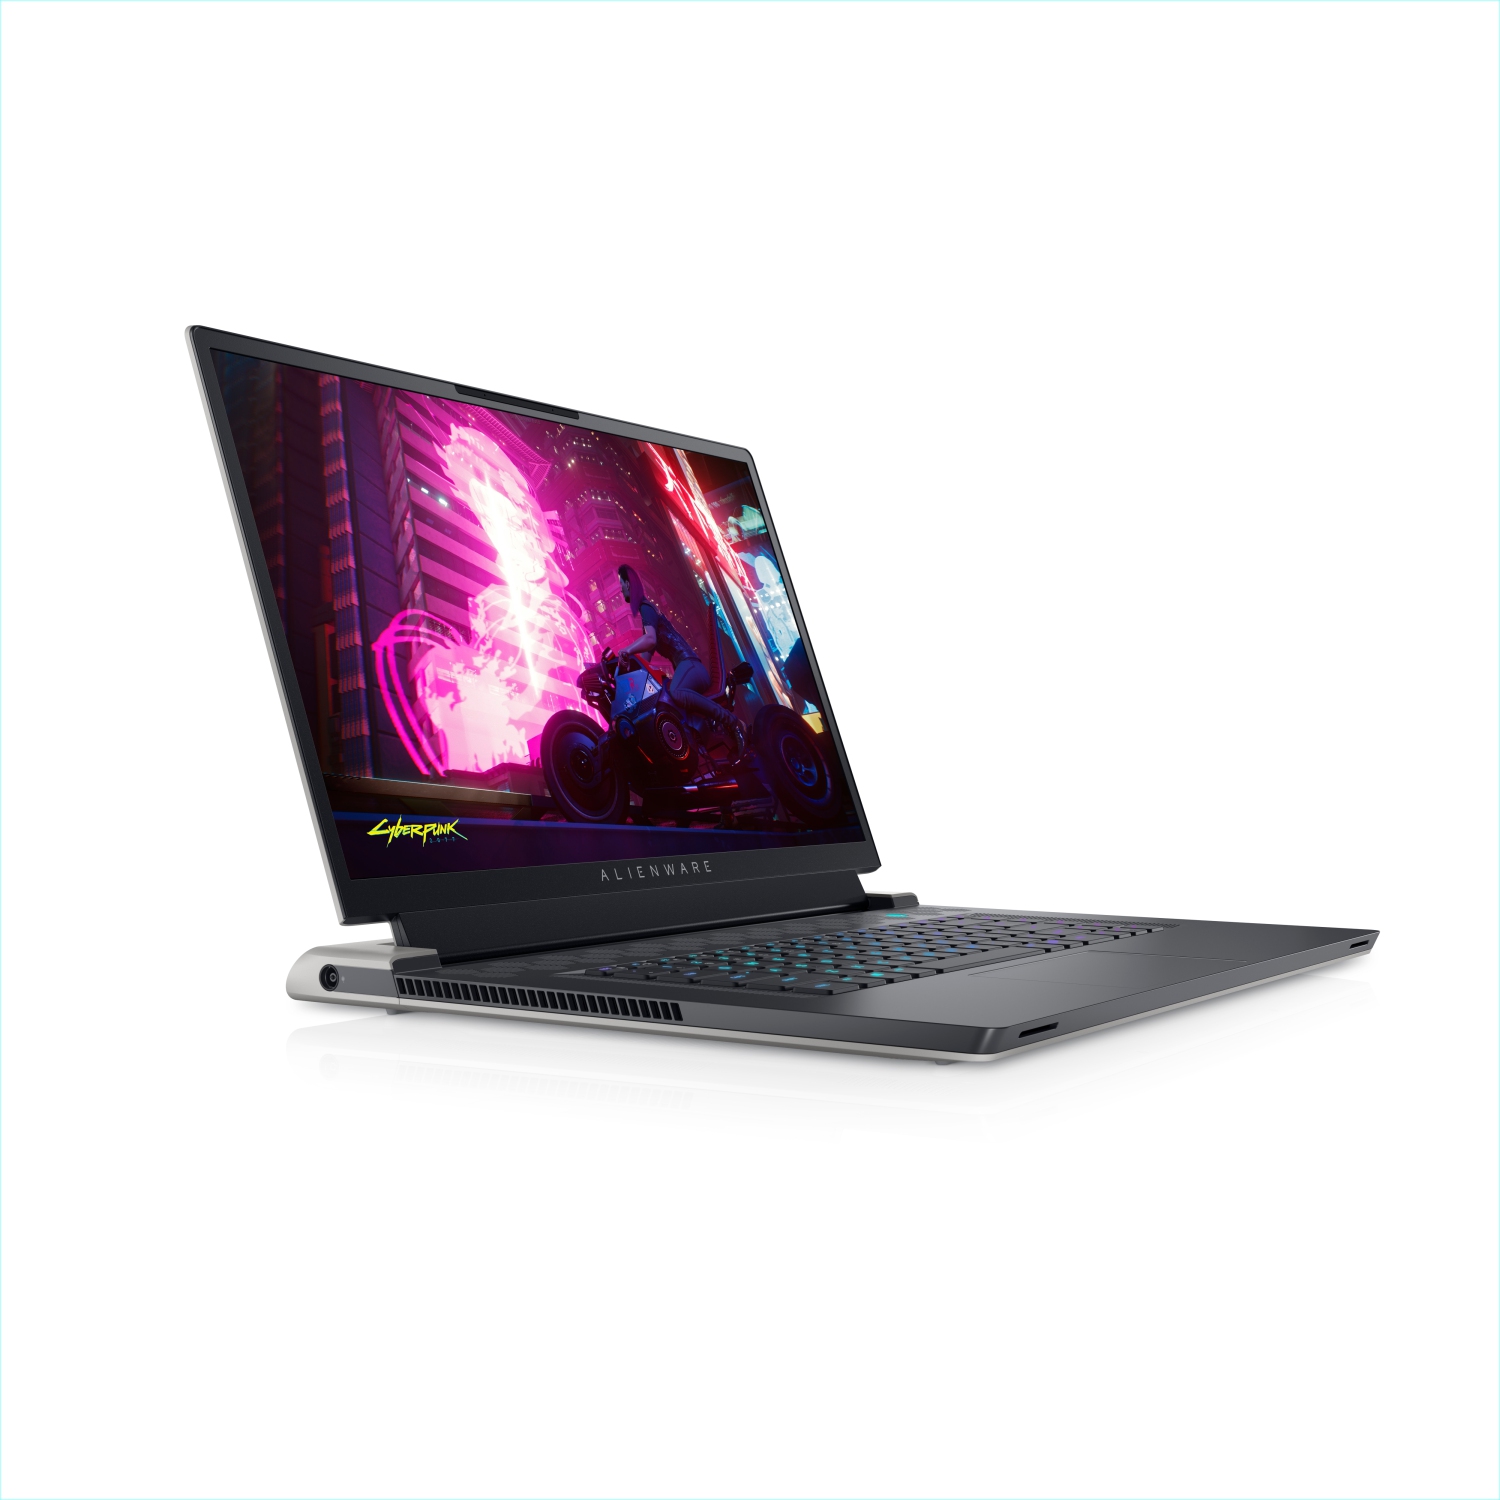 Refurbished (Excellent) - Dell Alienware X17 R1 Gaming Laptop (2021), 17.3" FHD, Core i7, 1TB SSD, 16GB RAM, RTX 3060, 8 Cores @ 4.6 GHz, 11th Gen CPU Certified